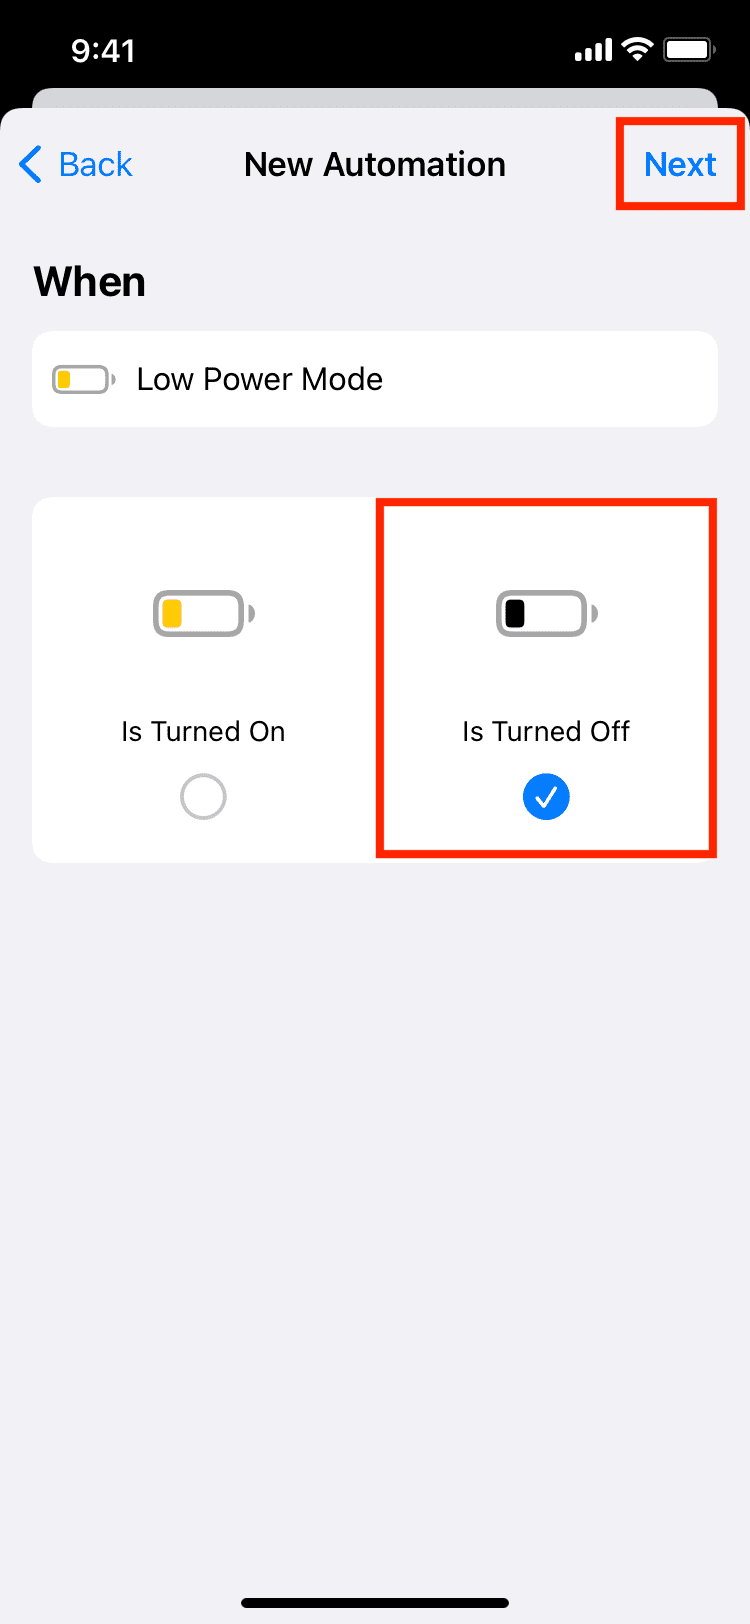 Steps on how to force your iPhone to always stay in Low Power Mode